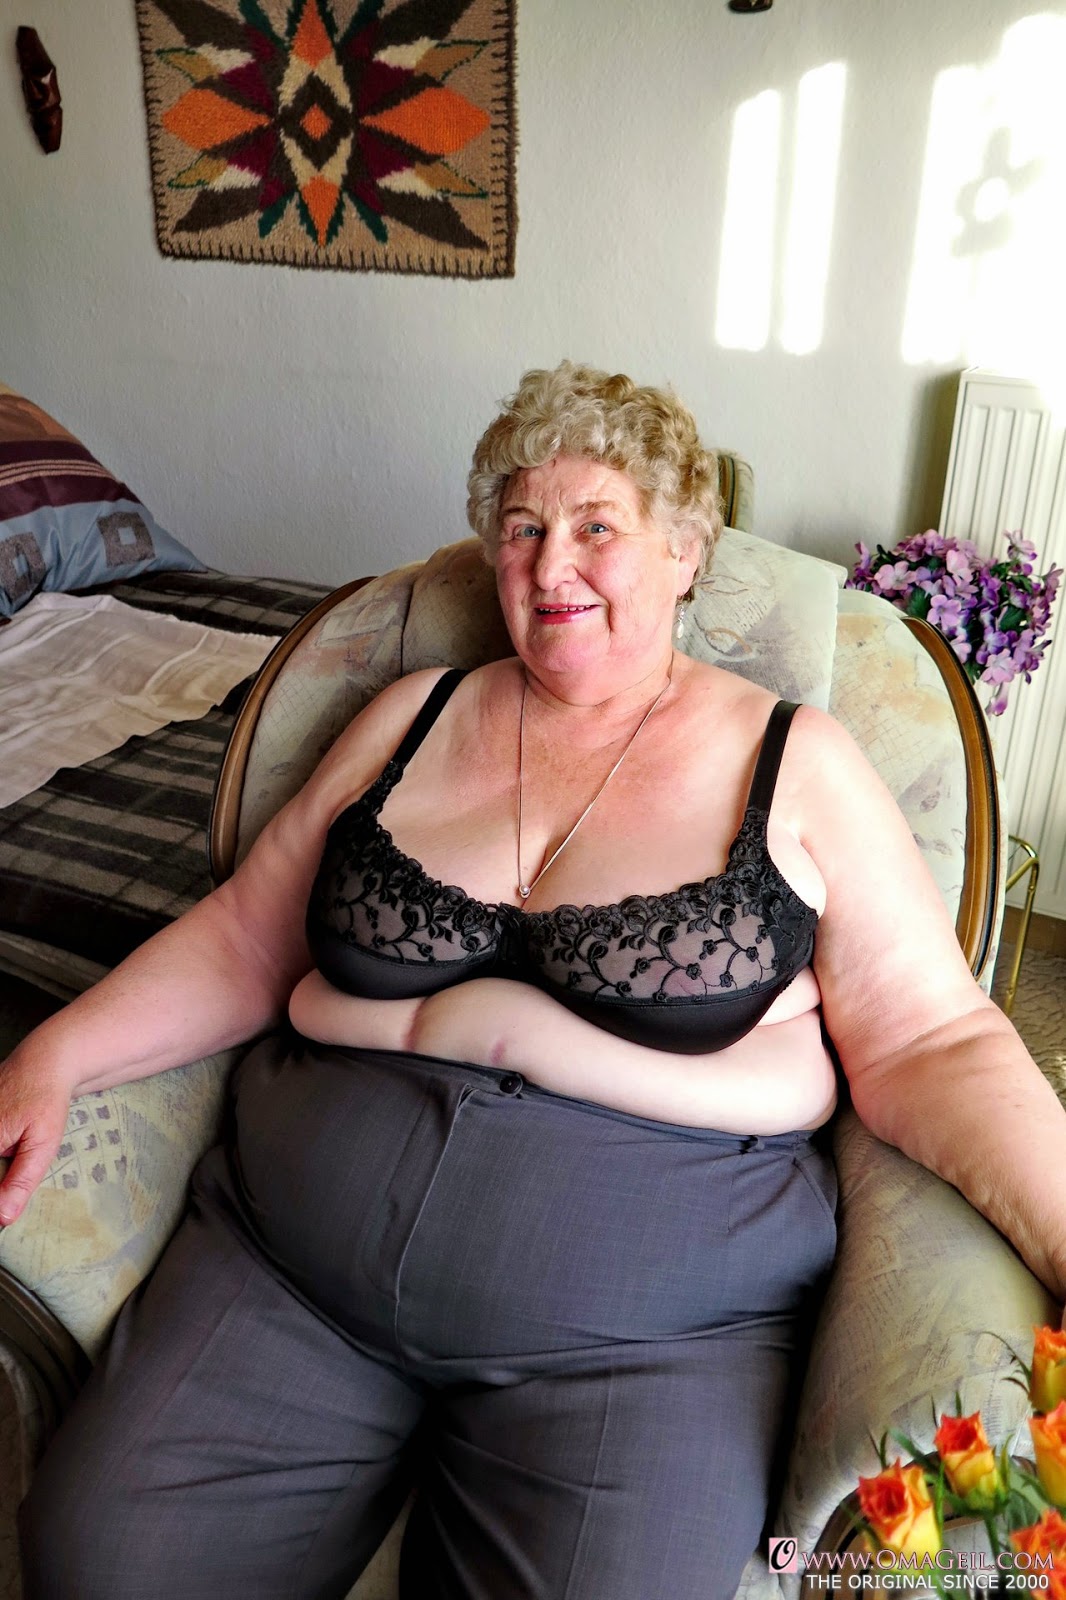 Hot Chunky - Hot Granny Porn Pictures and Vids - Free Granny and Mature Porn Blog: Large  chunky grandma laid in armchair